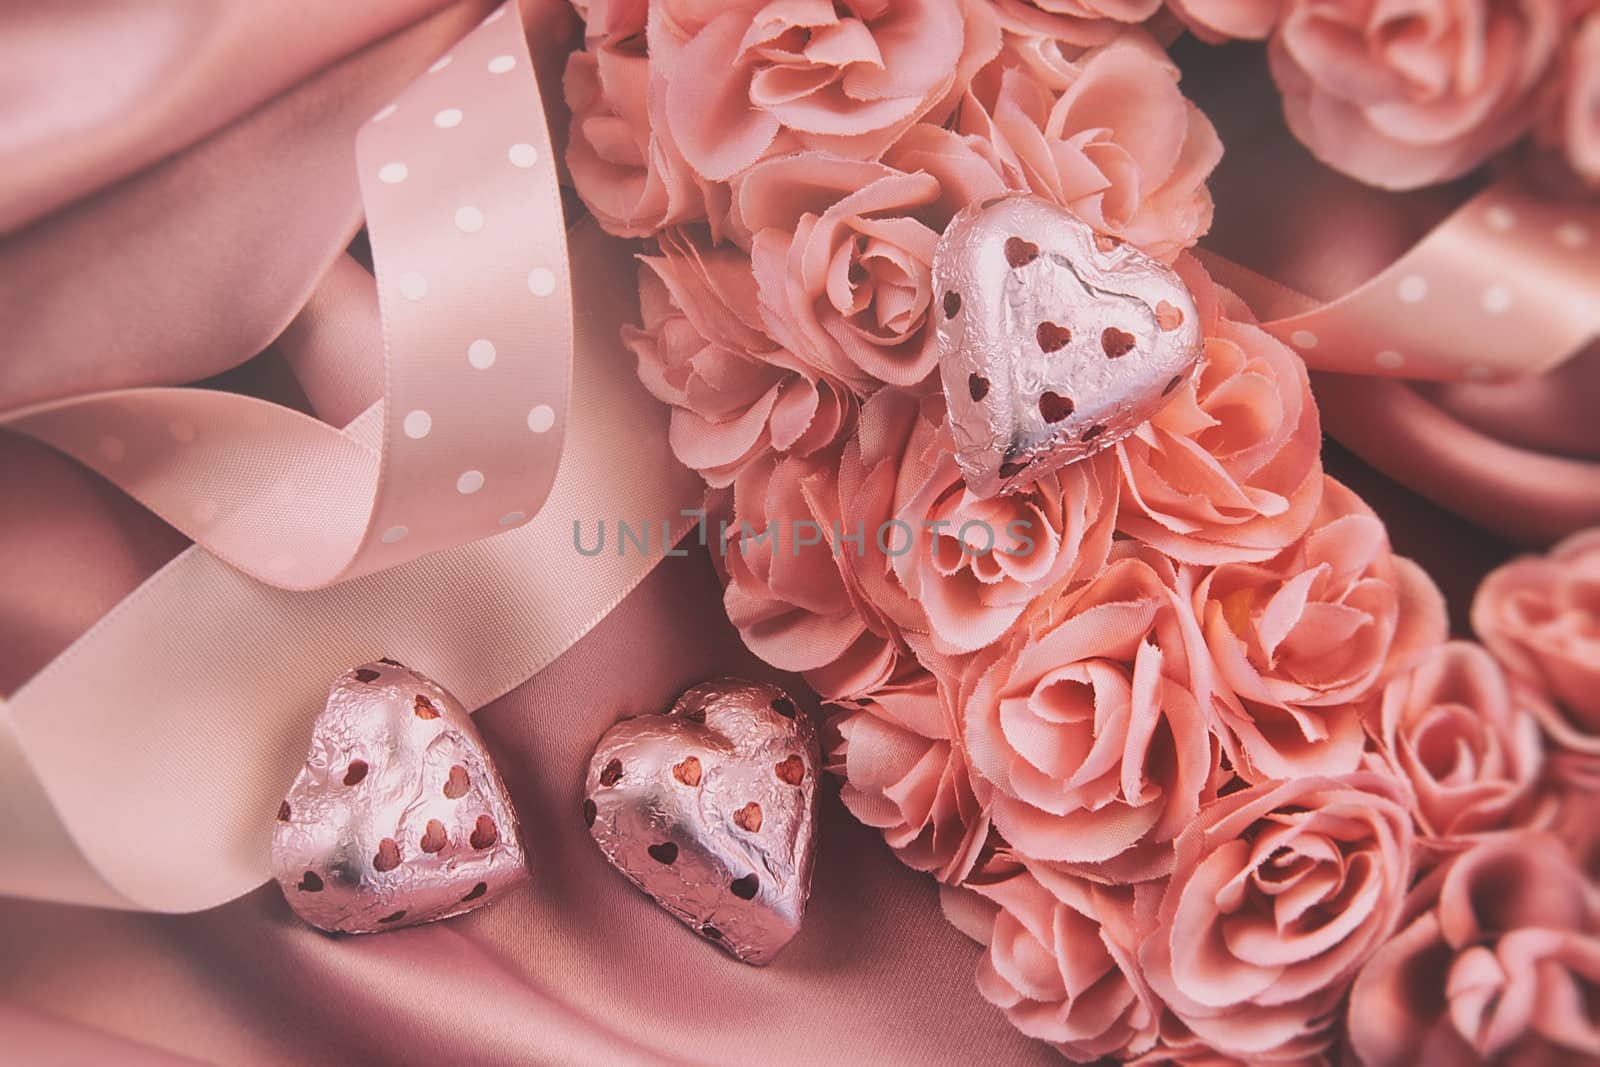 Heart made of pink roses with ribbons and chocolates on satin by Sandralise